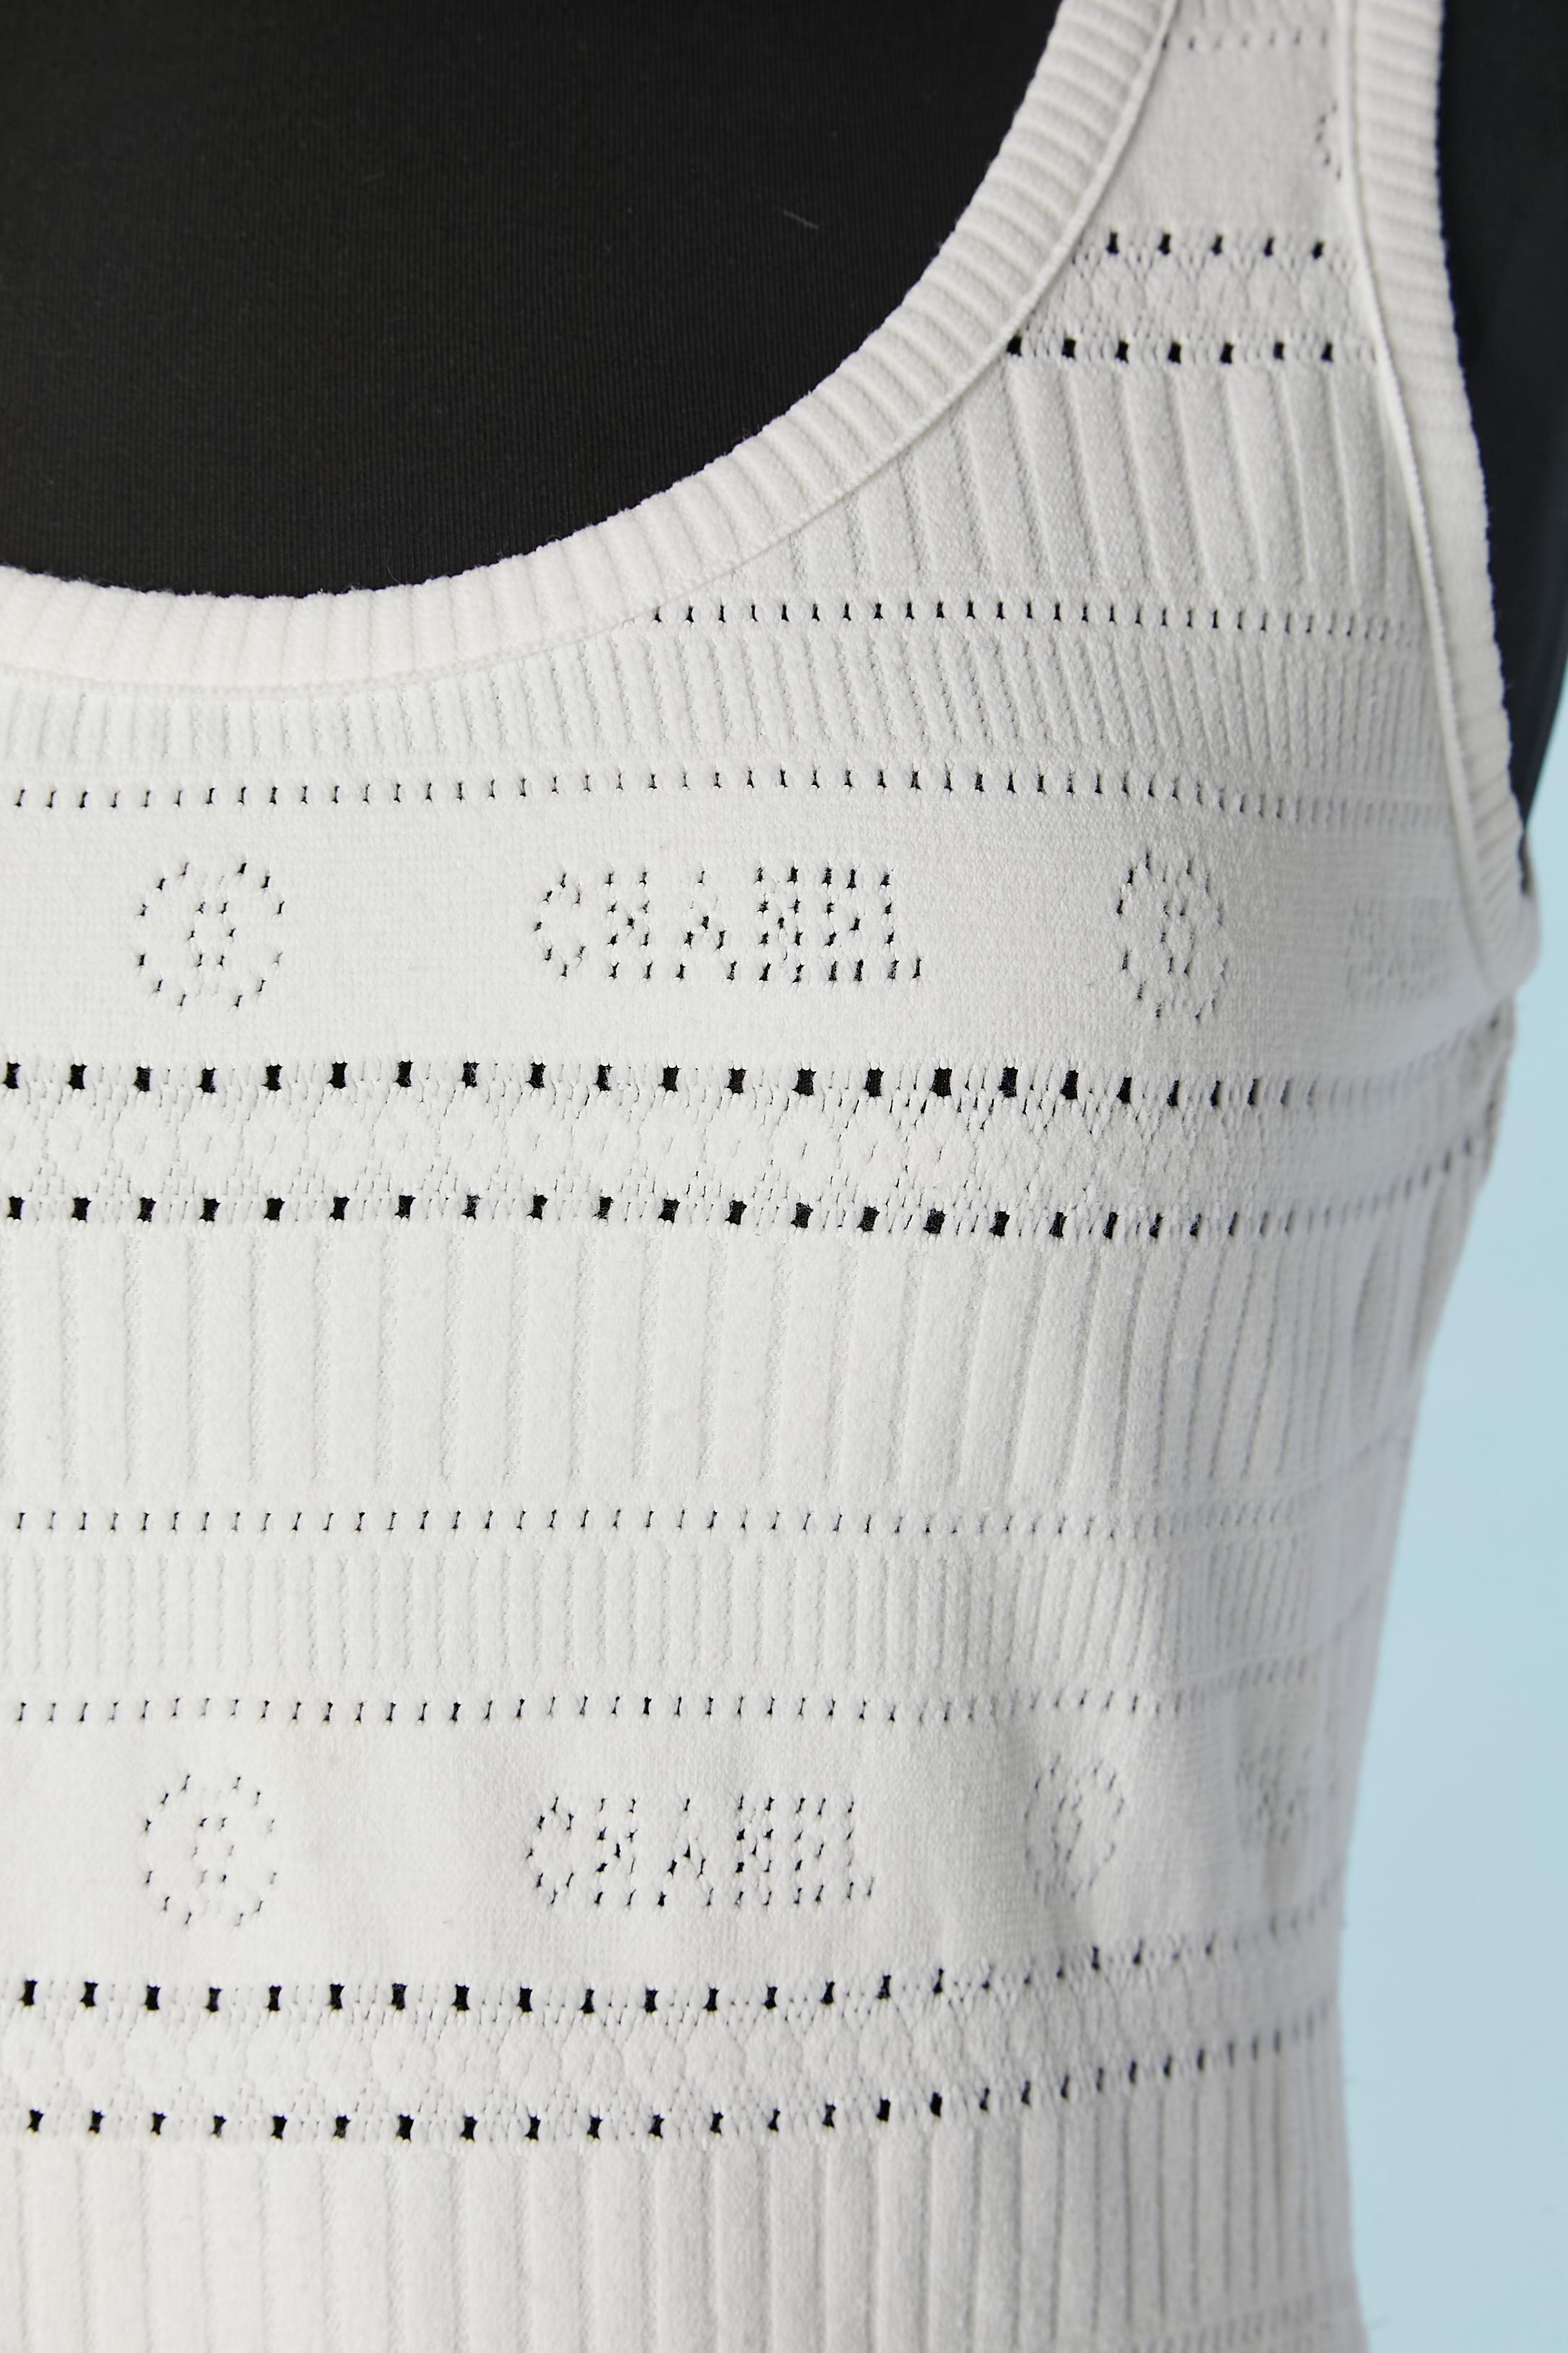 White jersey jacquard tank top . Fabric composition: 92% polyamide, 8% spandex
SIZE 44 but fit M 